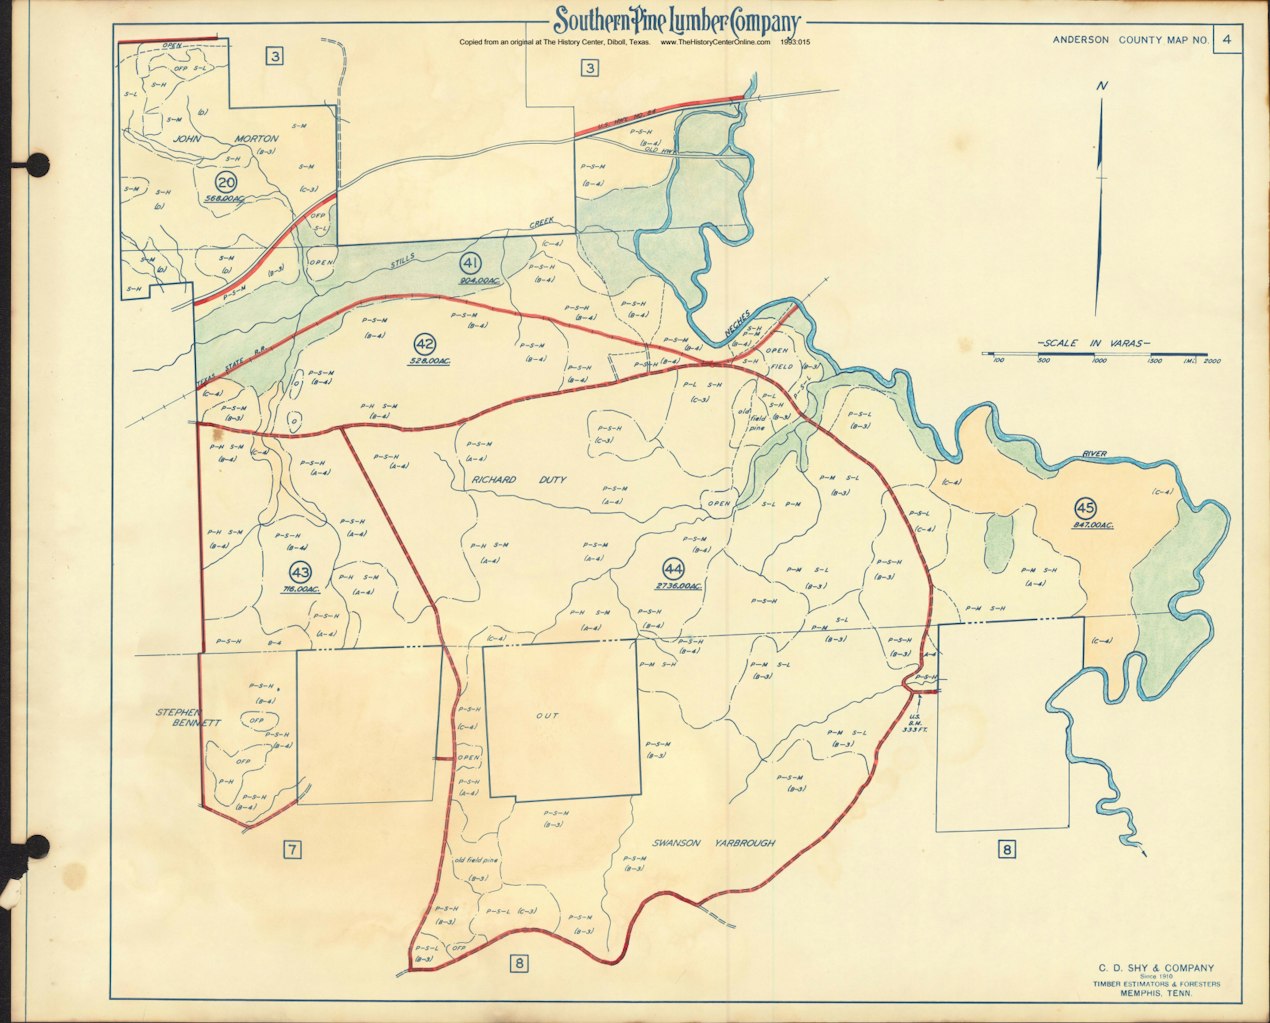 006 1955 Anderson County Timberlands Map 04